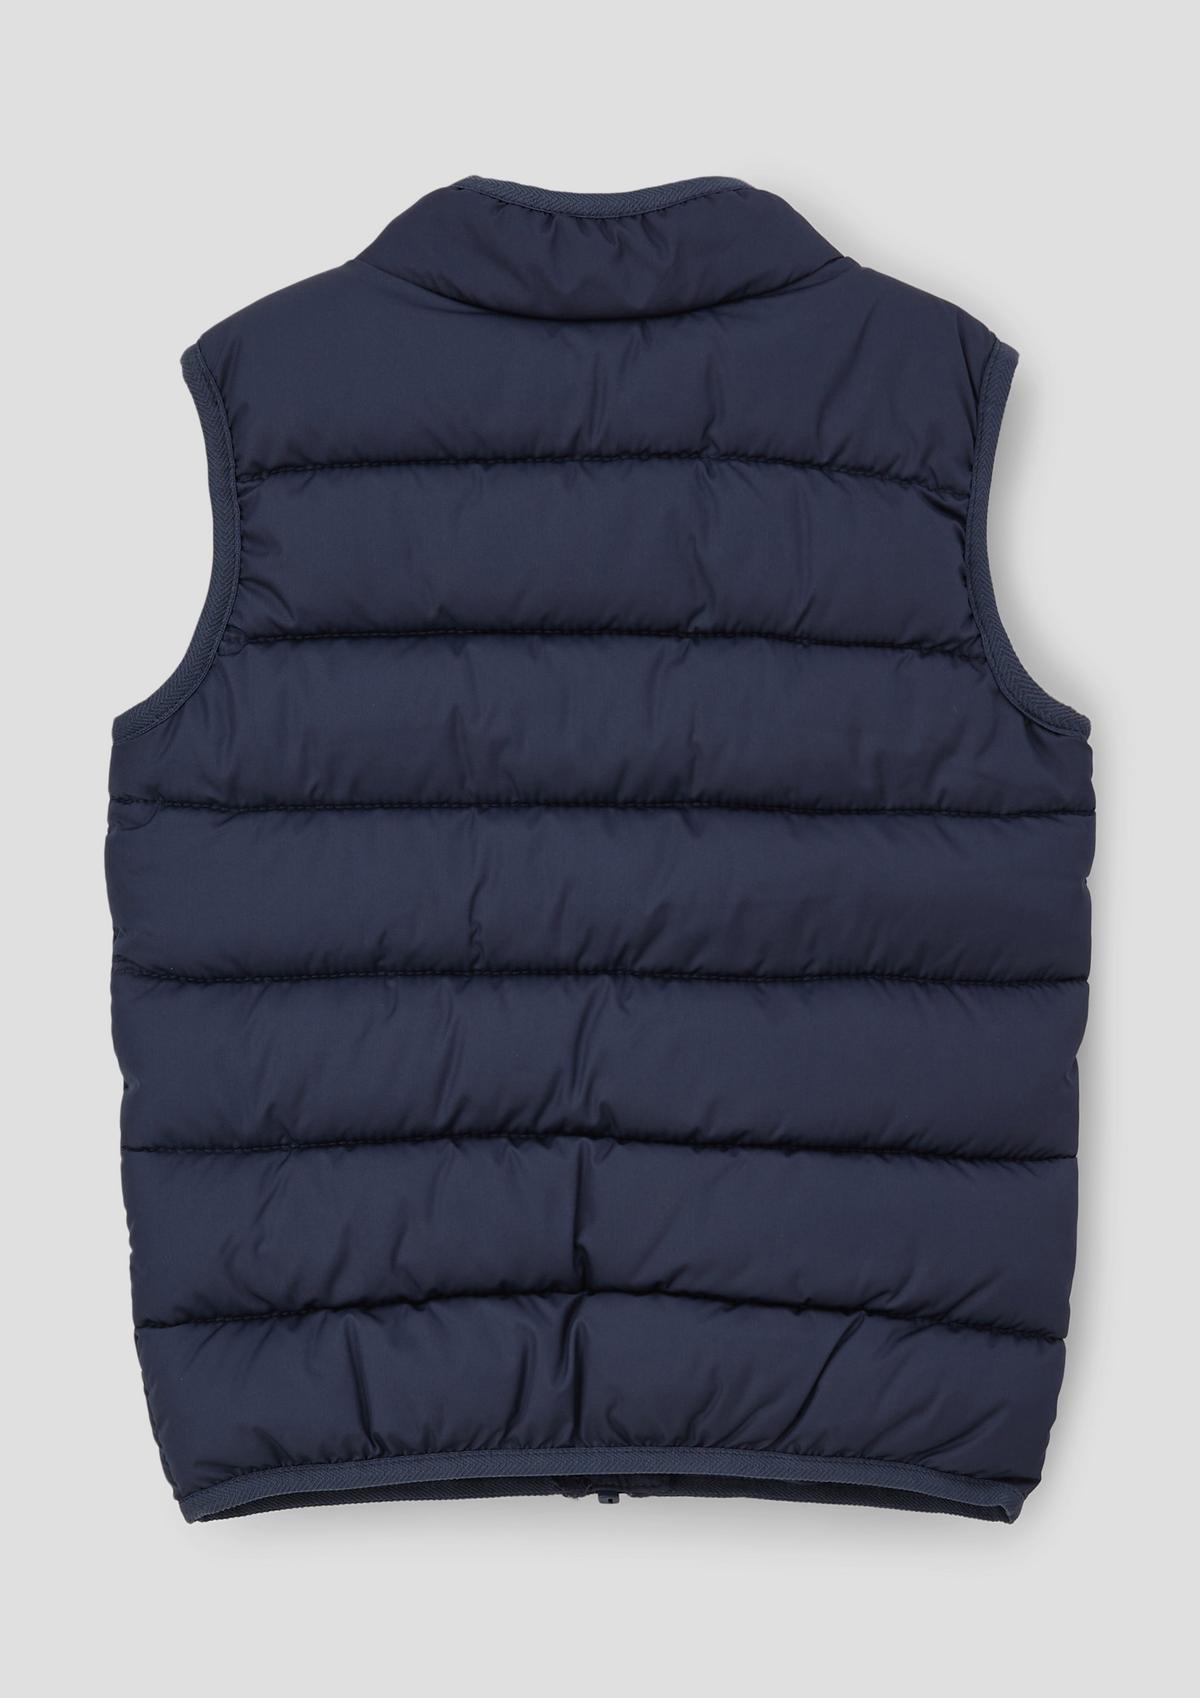 s.Oliver Quilted body warmer with a crinkled texture